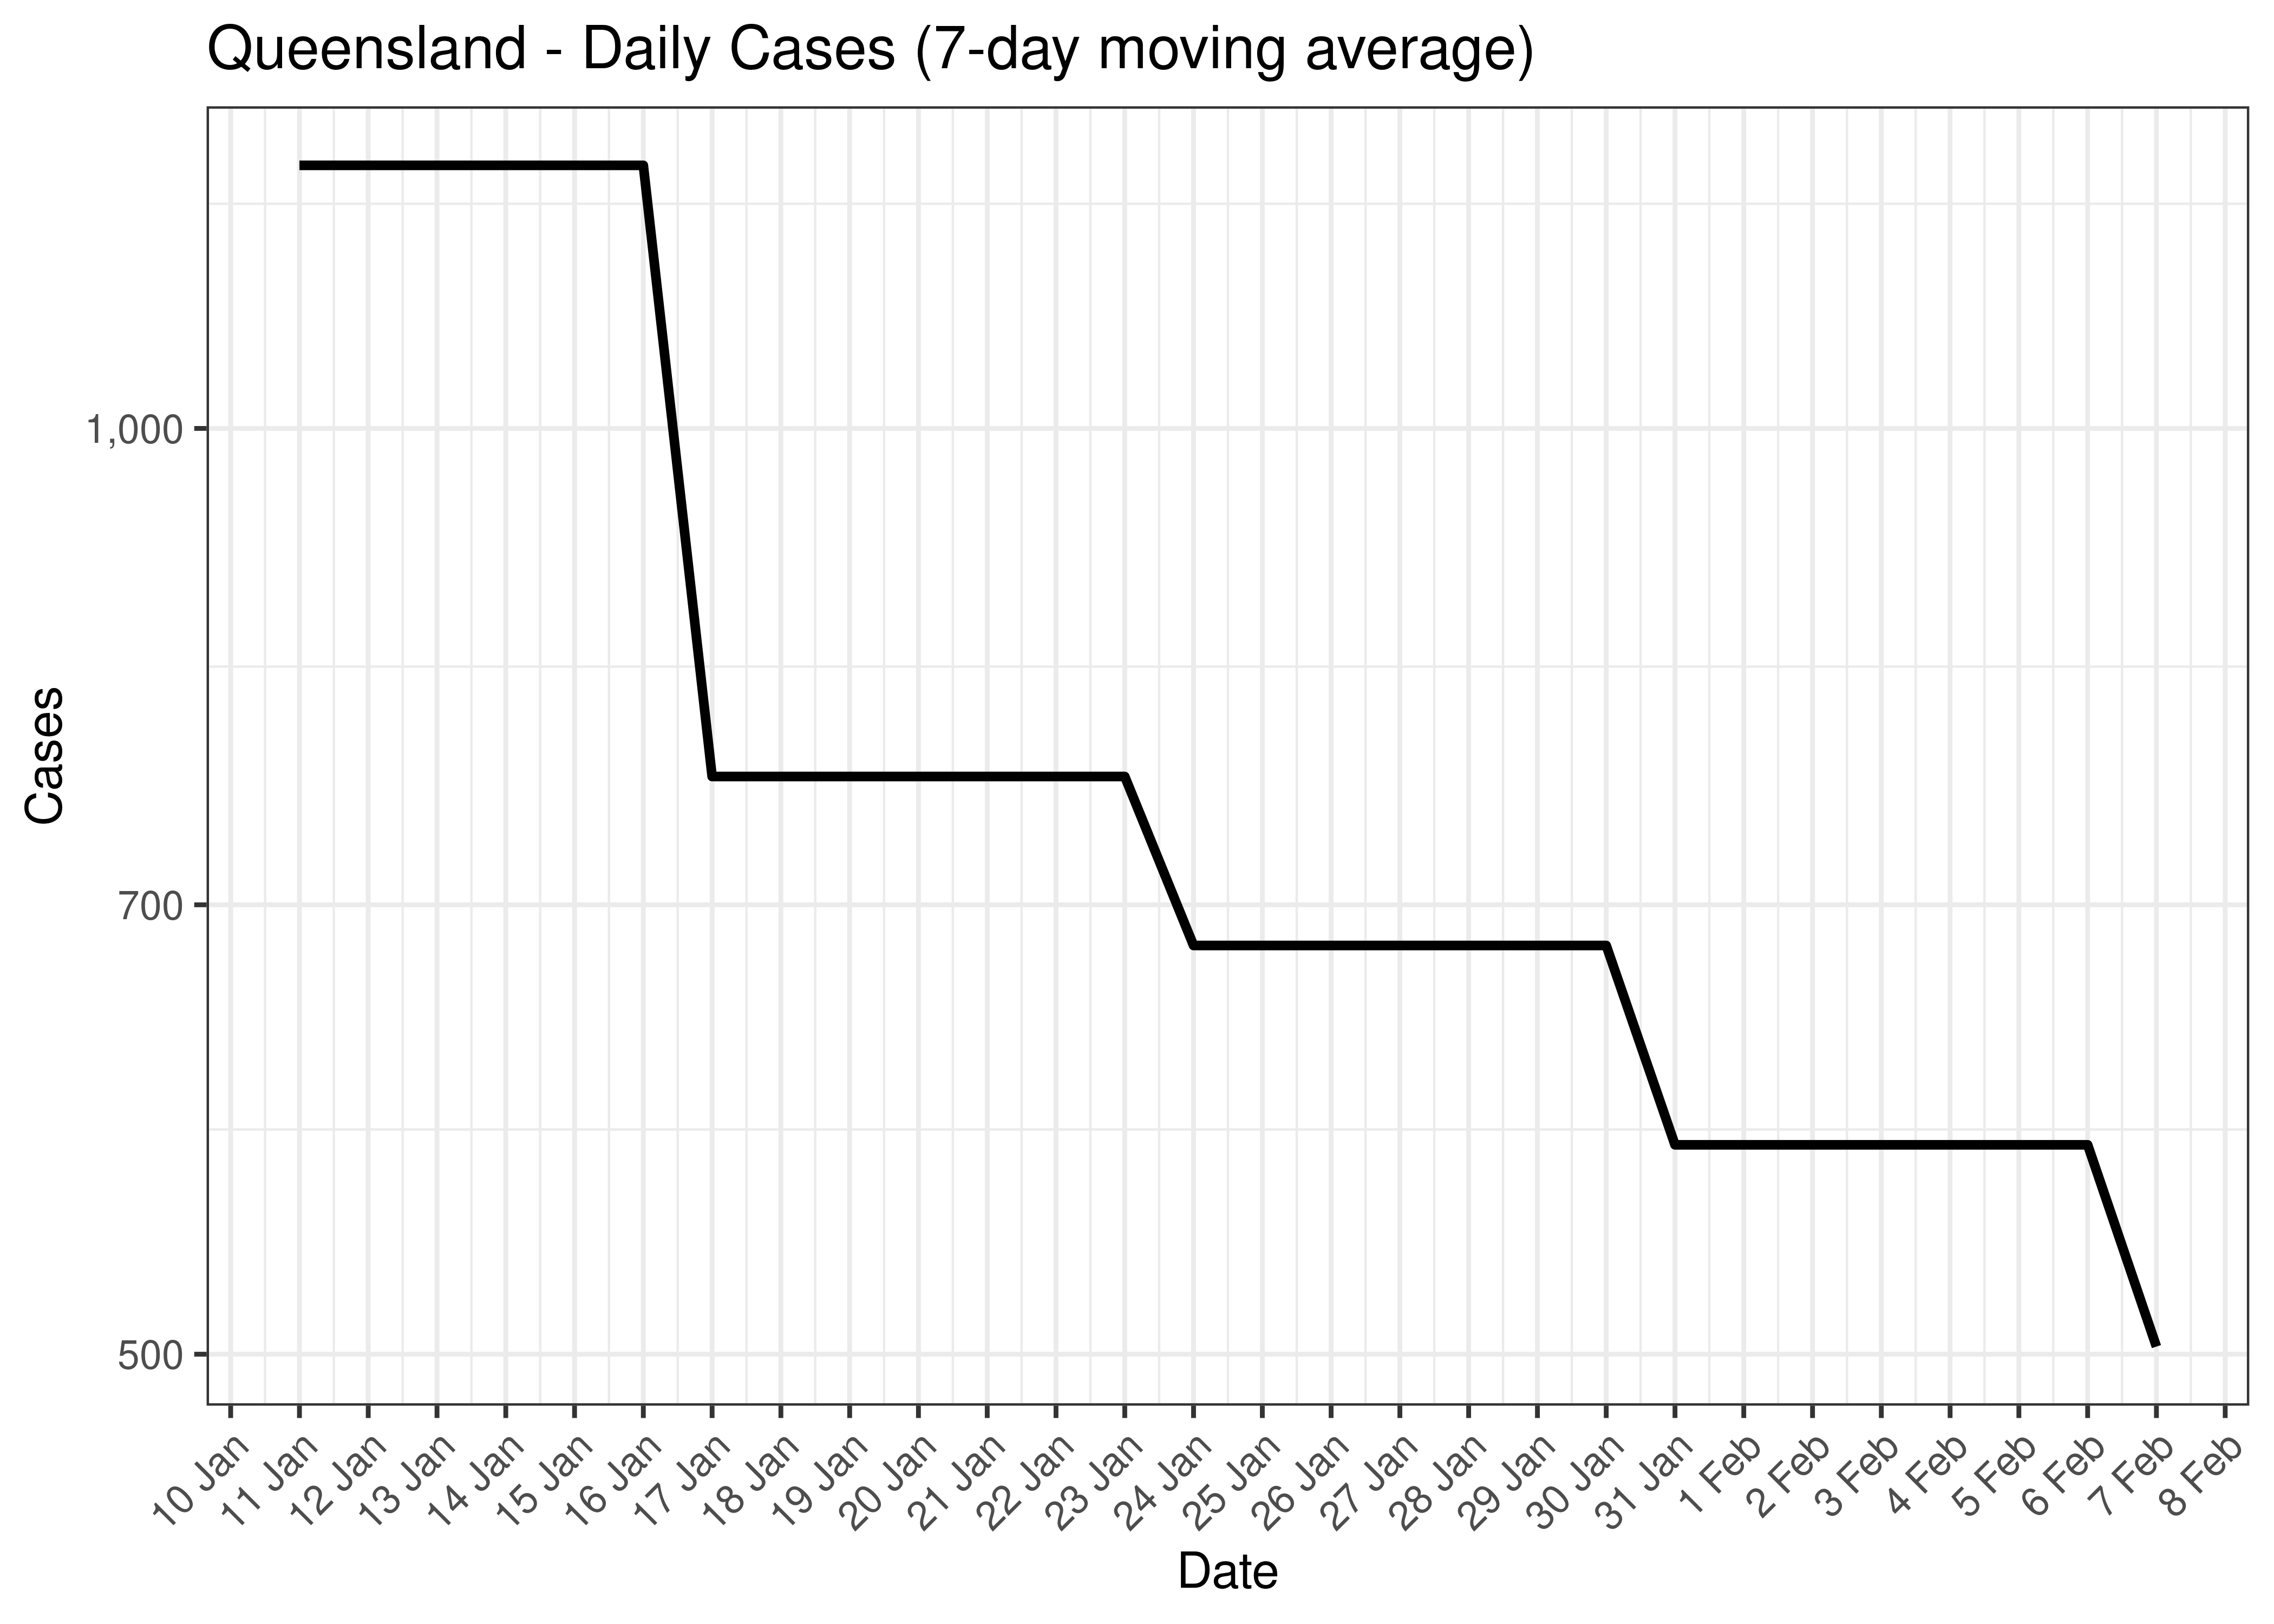 Estimated Effective Reproduction Number Based on Cases for Northern Territory over last 90 days